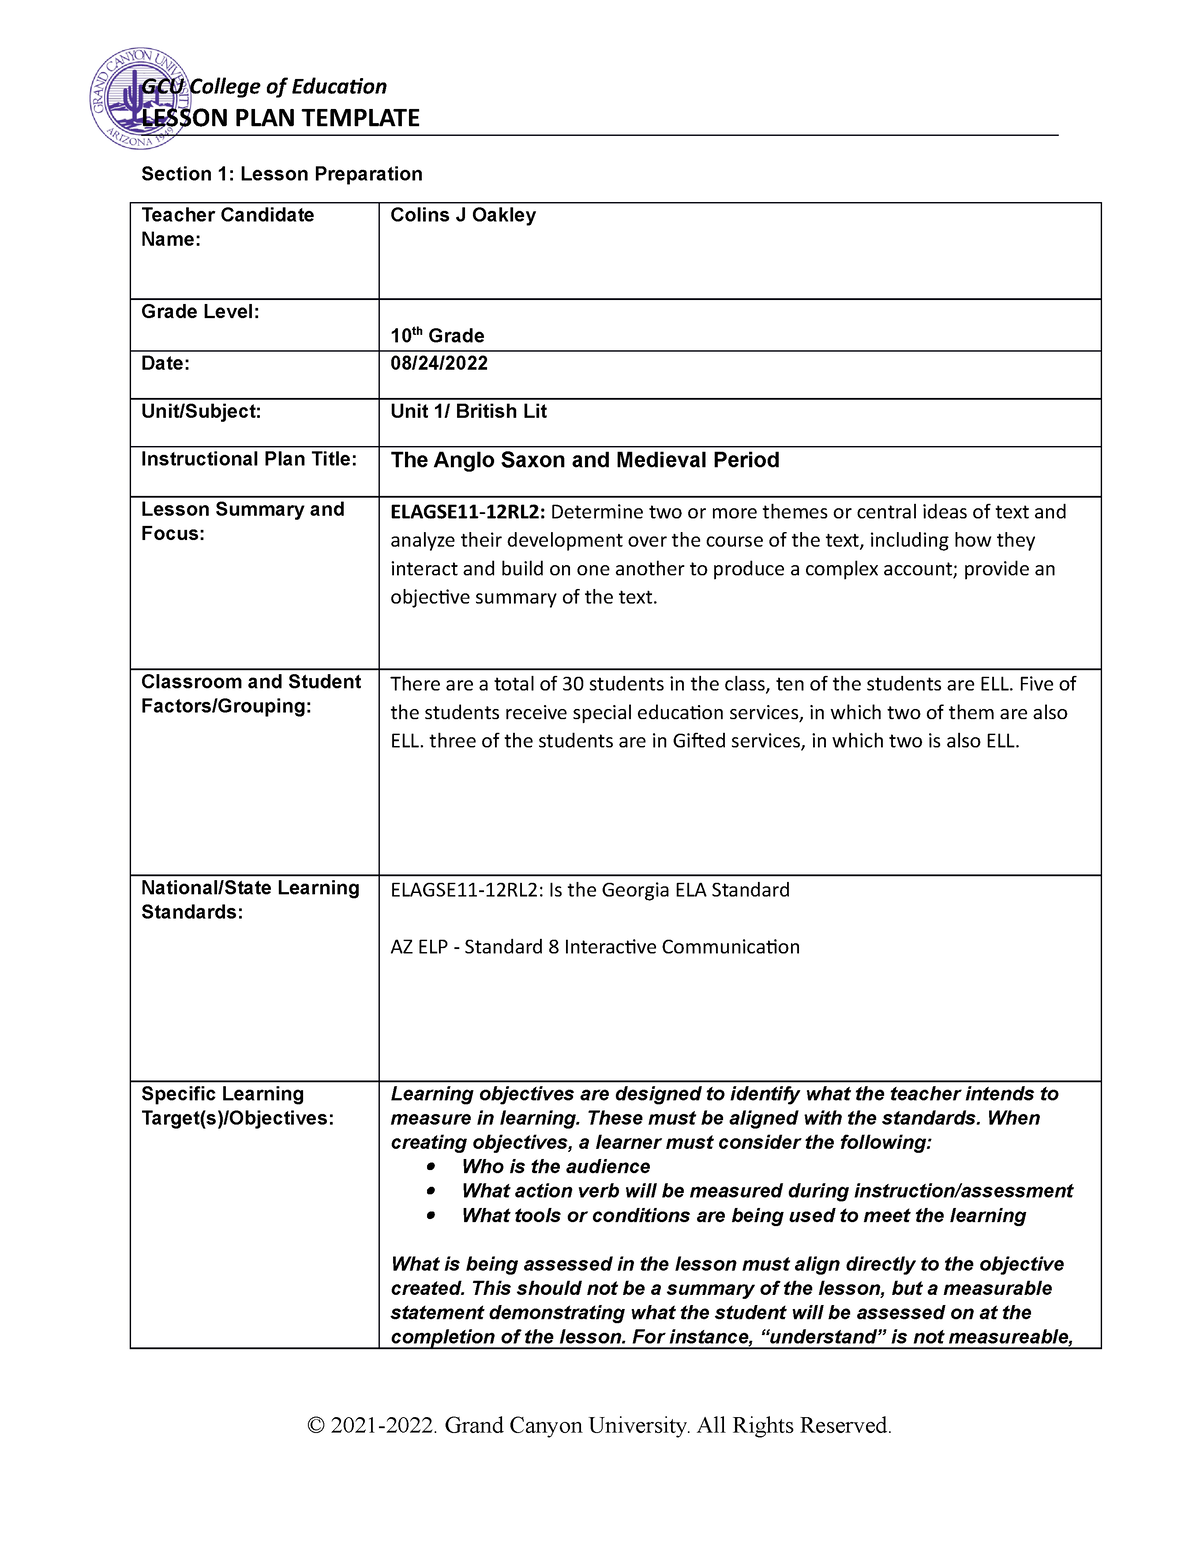 coe-lesson-plan-template-2-lesson-plan-template-section-1-lesson